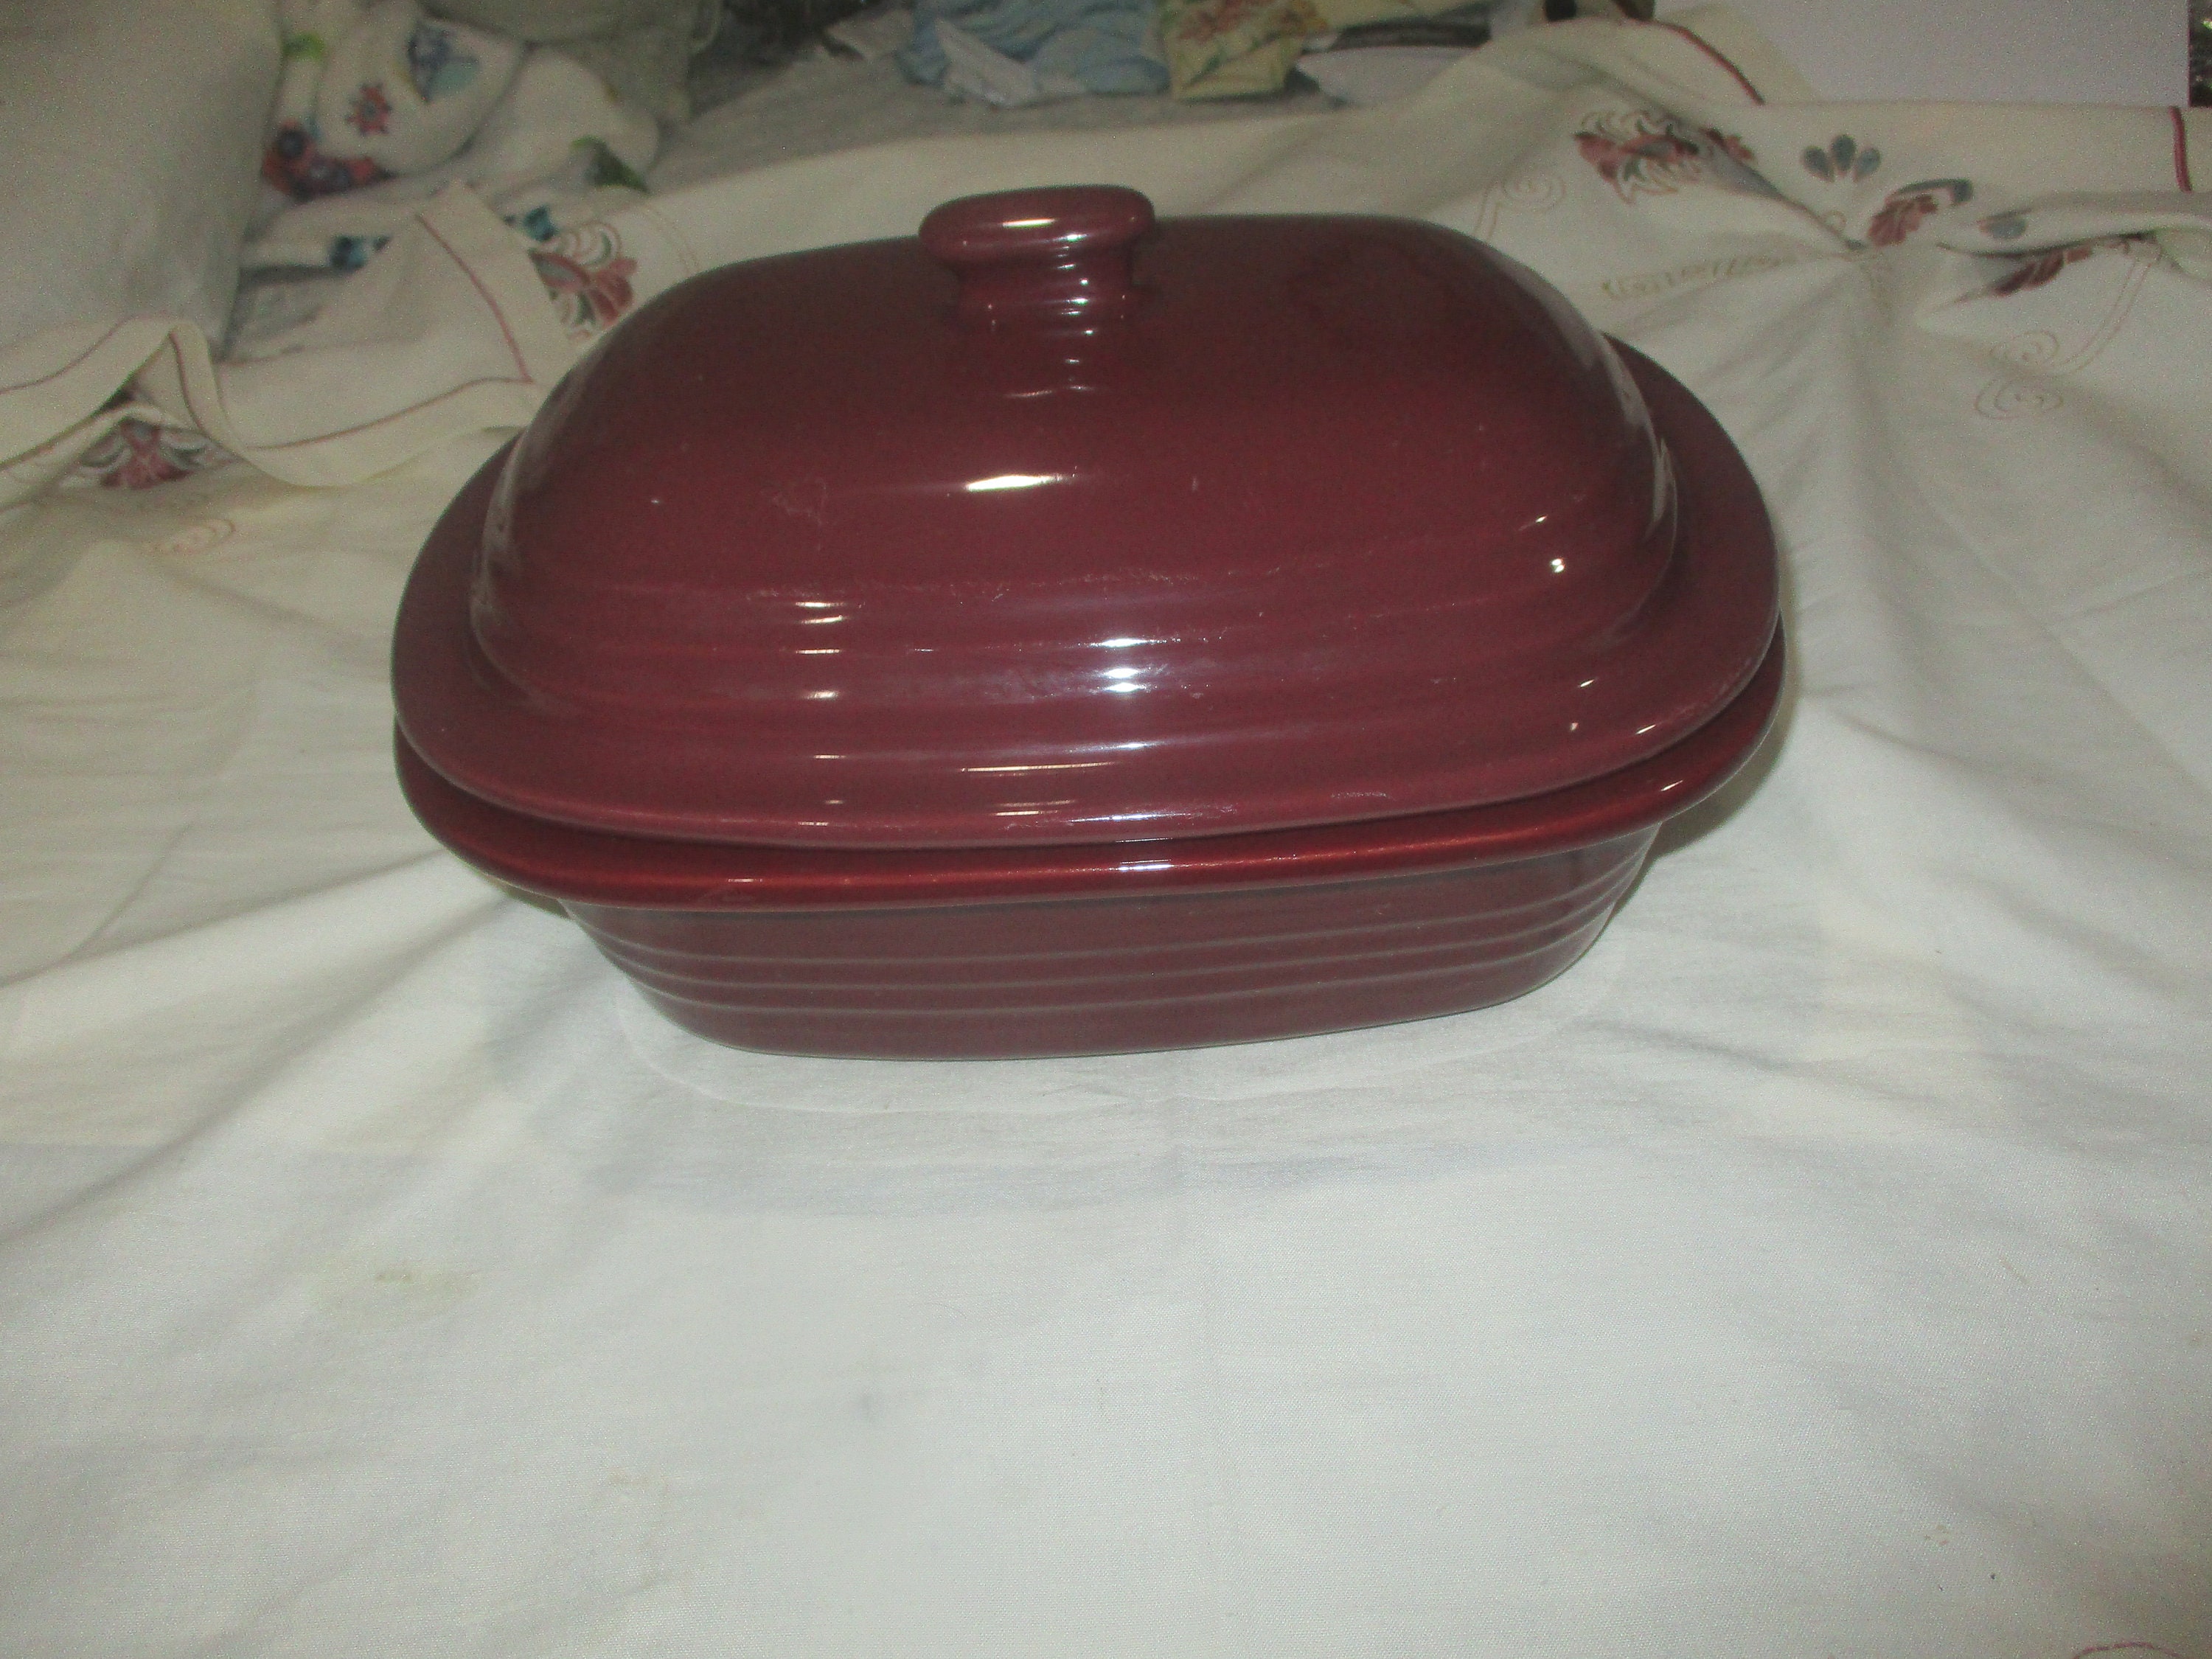 The Pampered Chef Deep Covered Baker for Oven and/or Microwave